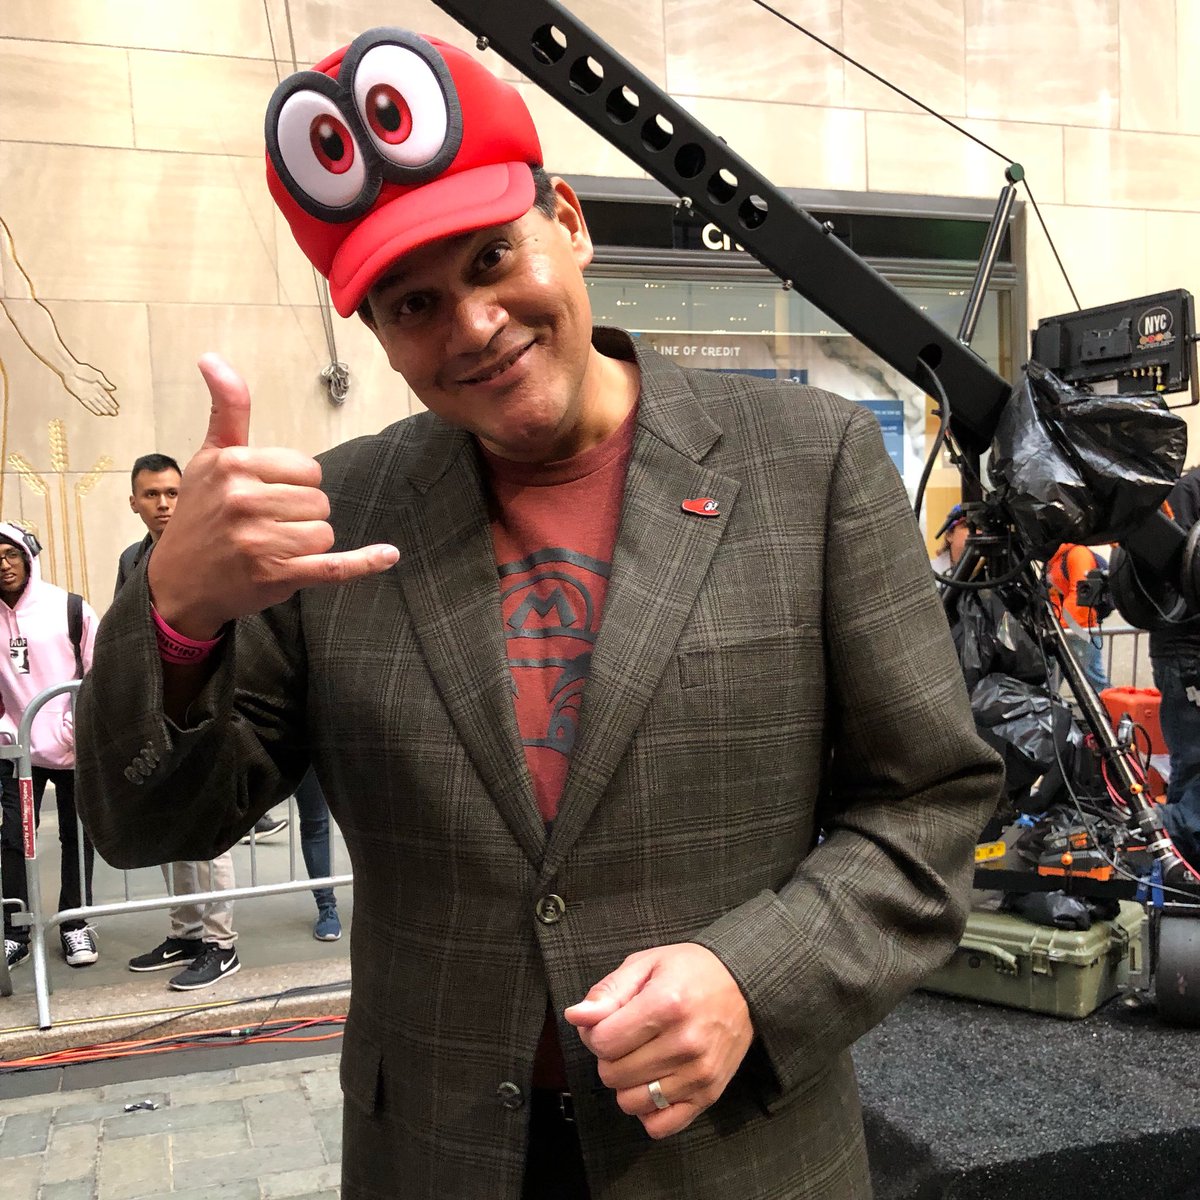 Reggie is here for the Super Mario Odyssey launch at #NintendoNYC! 